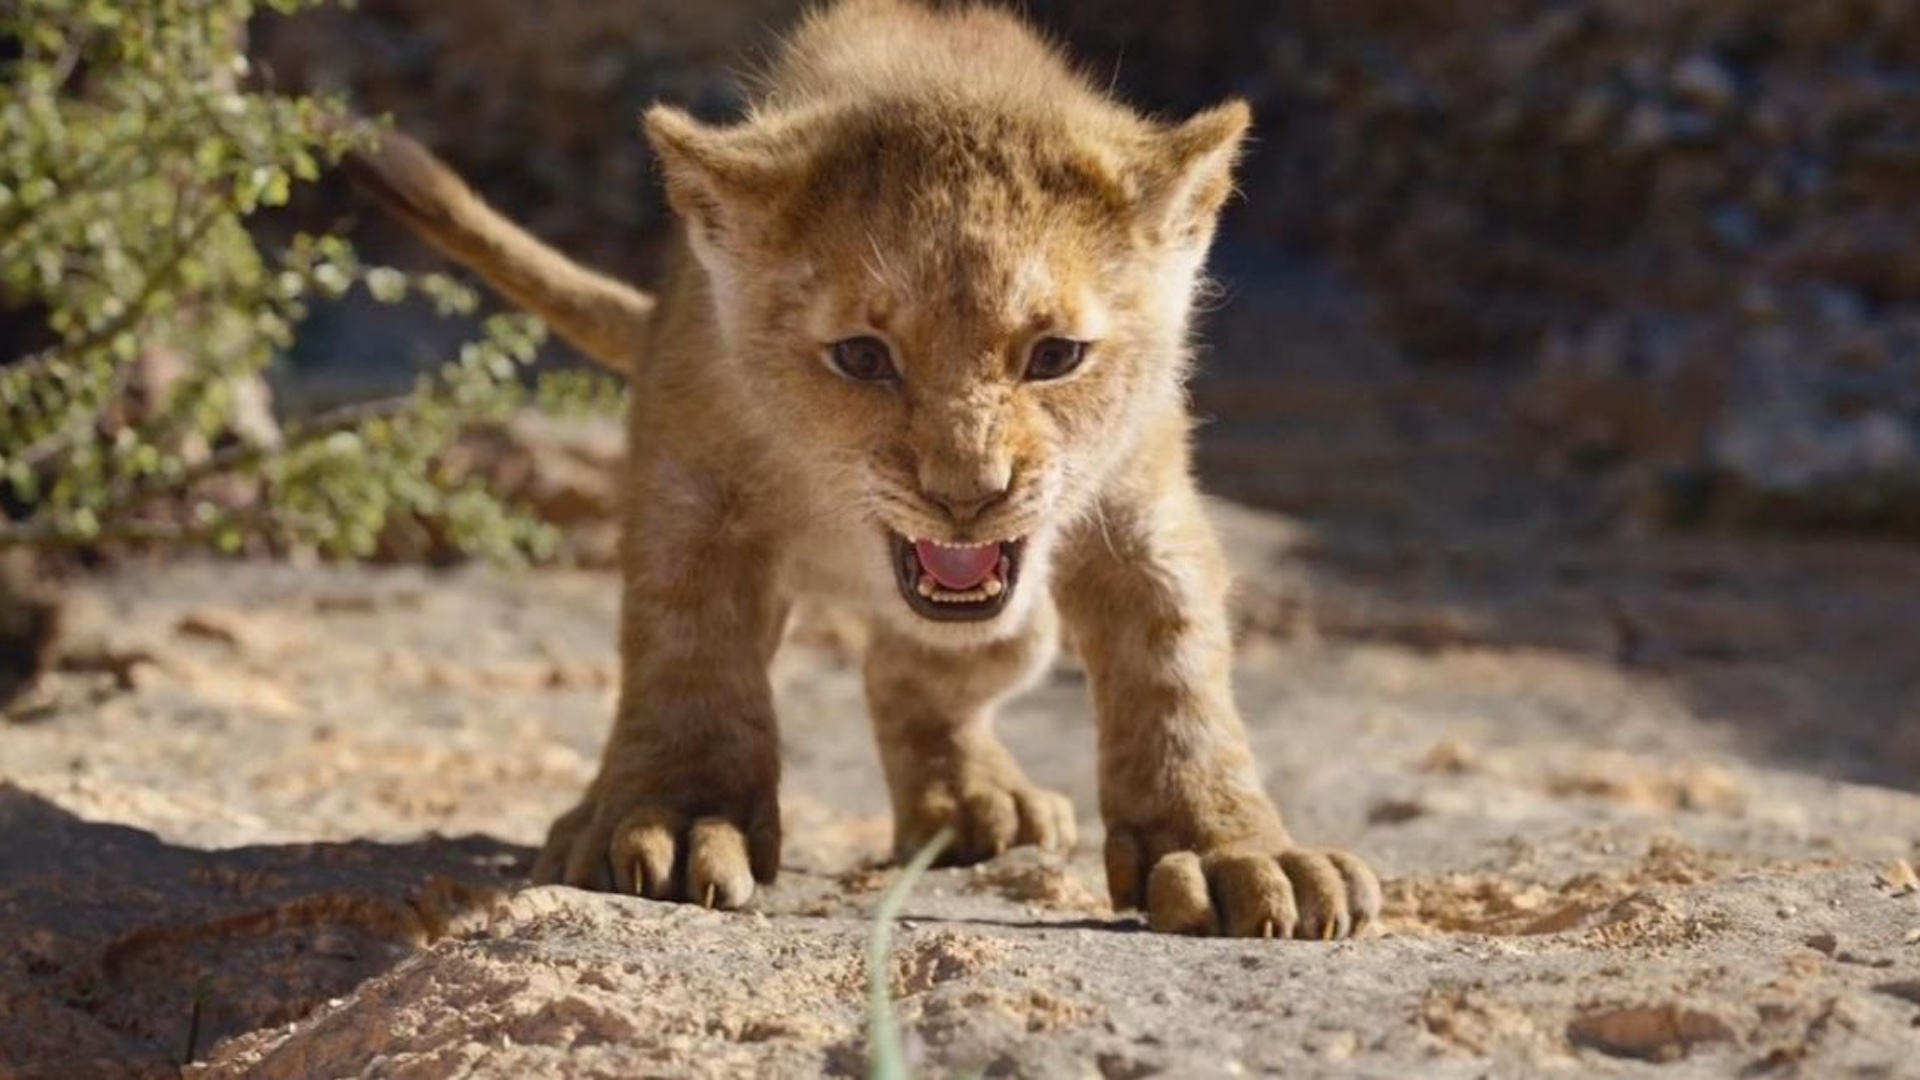 New clips for the lion king include circle of life find your roar âhakuna matataâ parison and more â